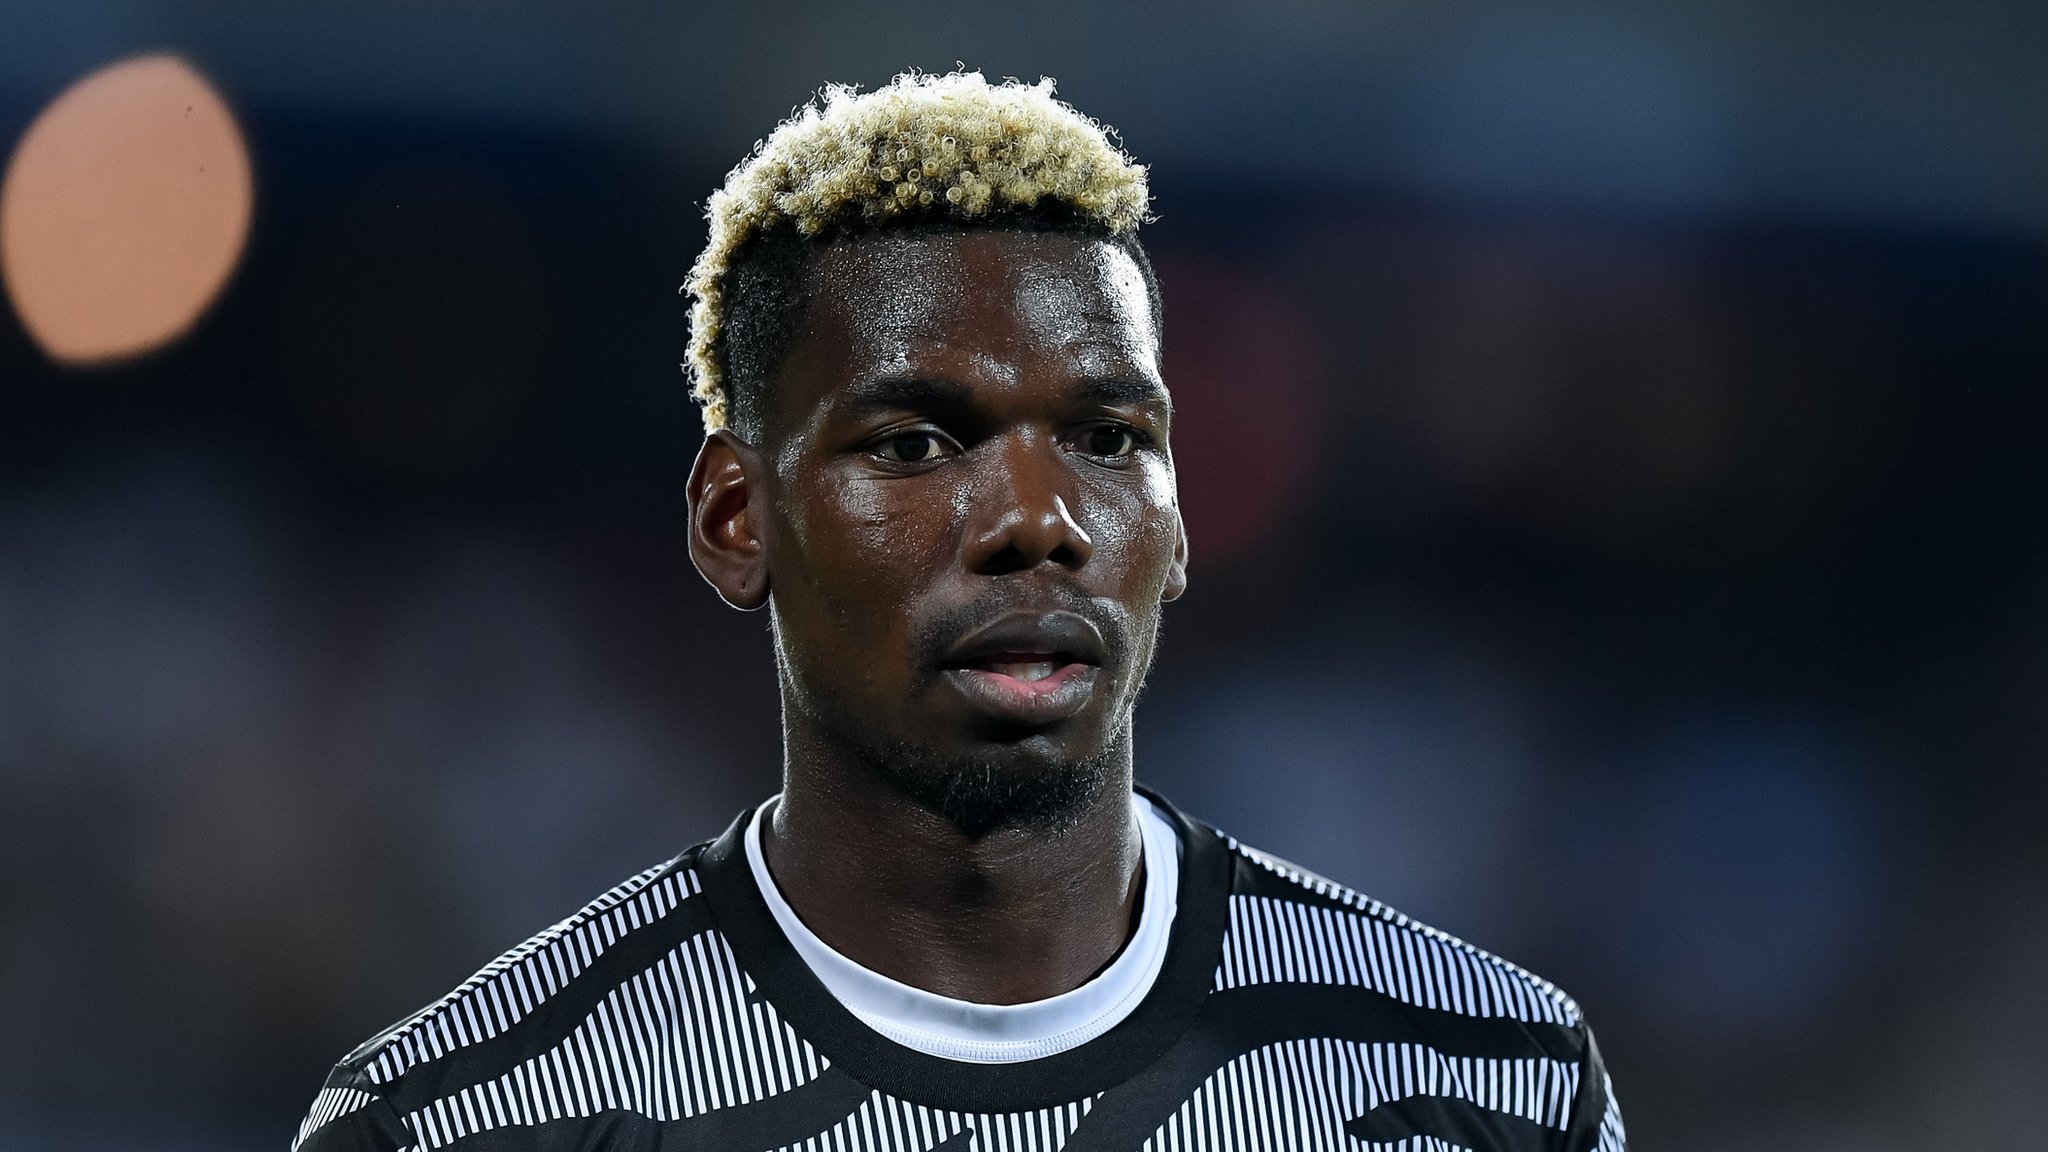 Paul Pogba banned: Juventus midfielder shocked by four-year suspension for doping